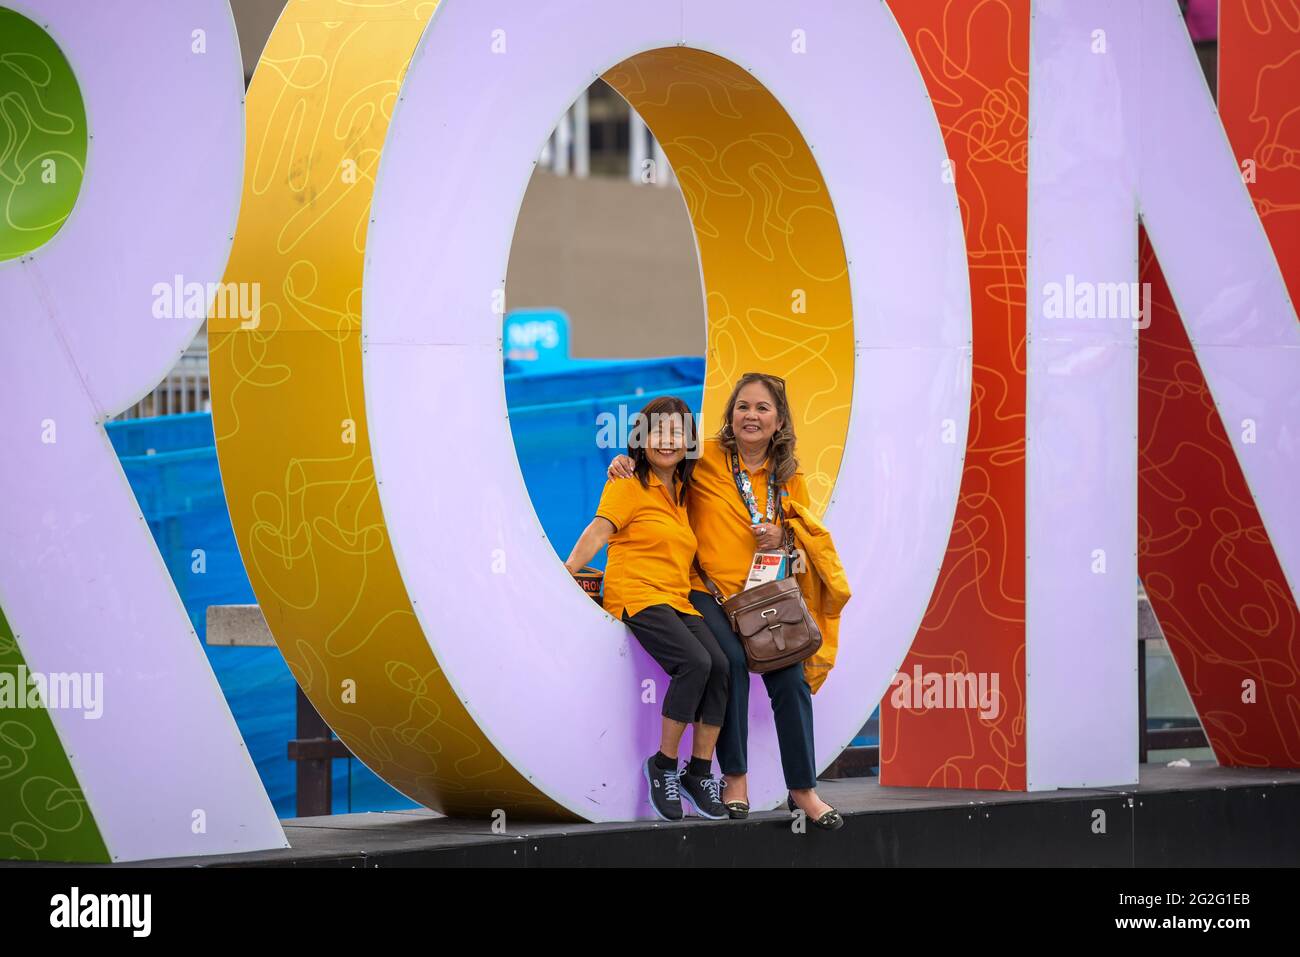 Toronto 2015 Pan Am and Parapan Am Games volunteers are honored by the city at Nathan Phillips Square. Stock Photo